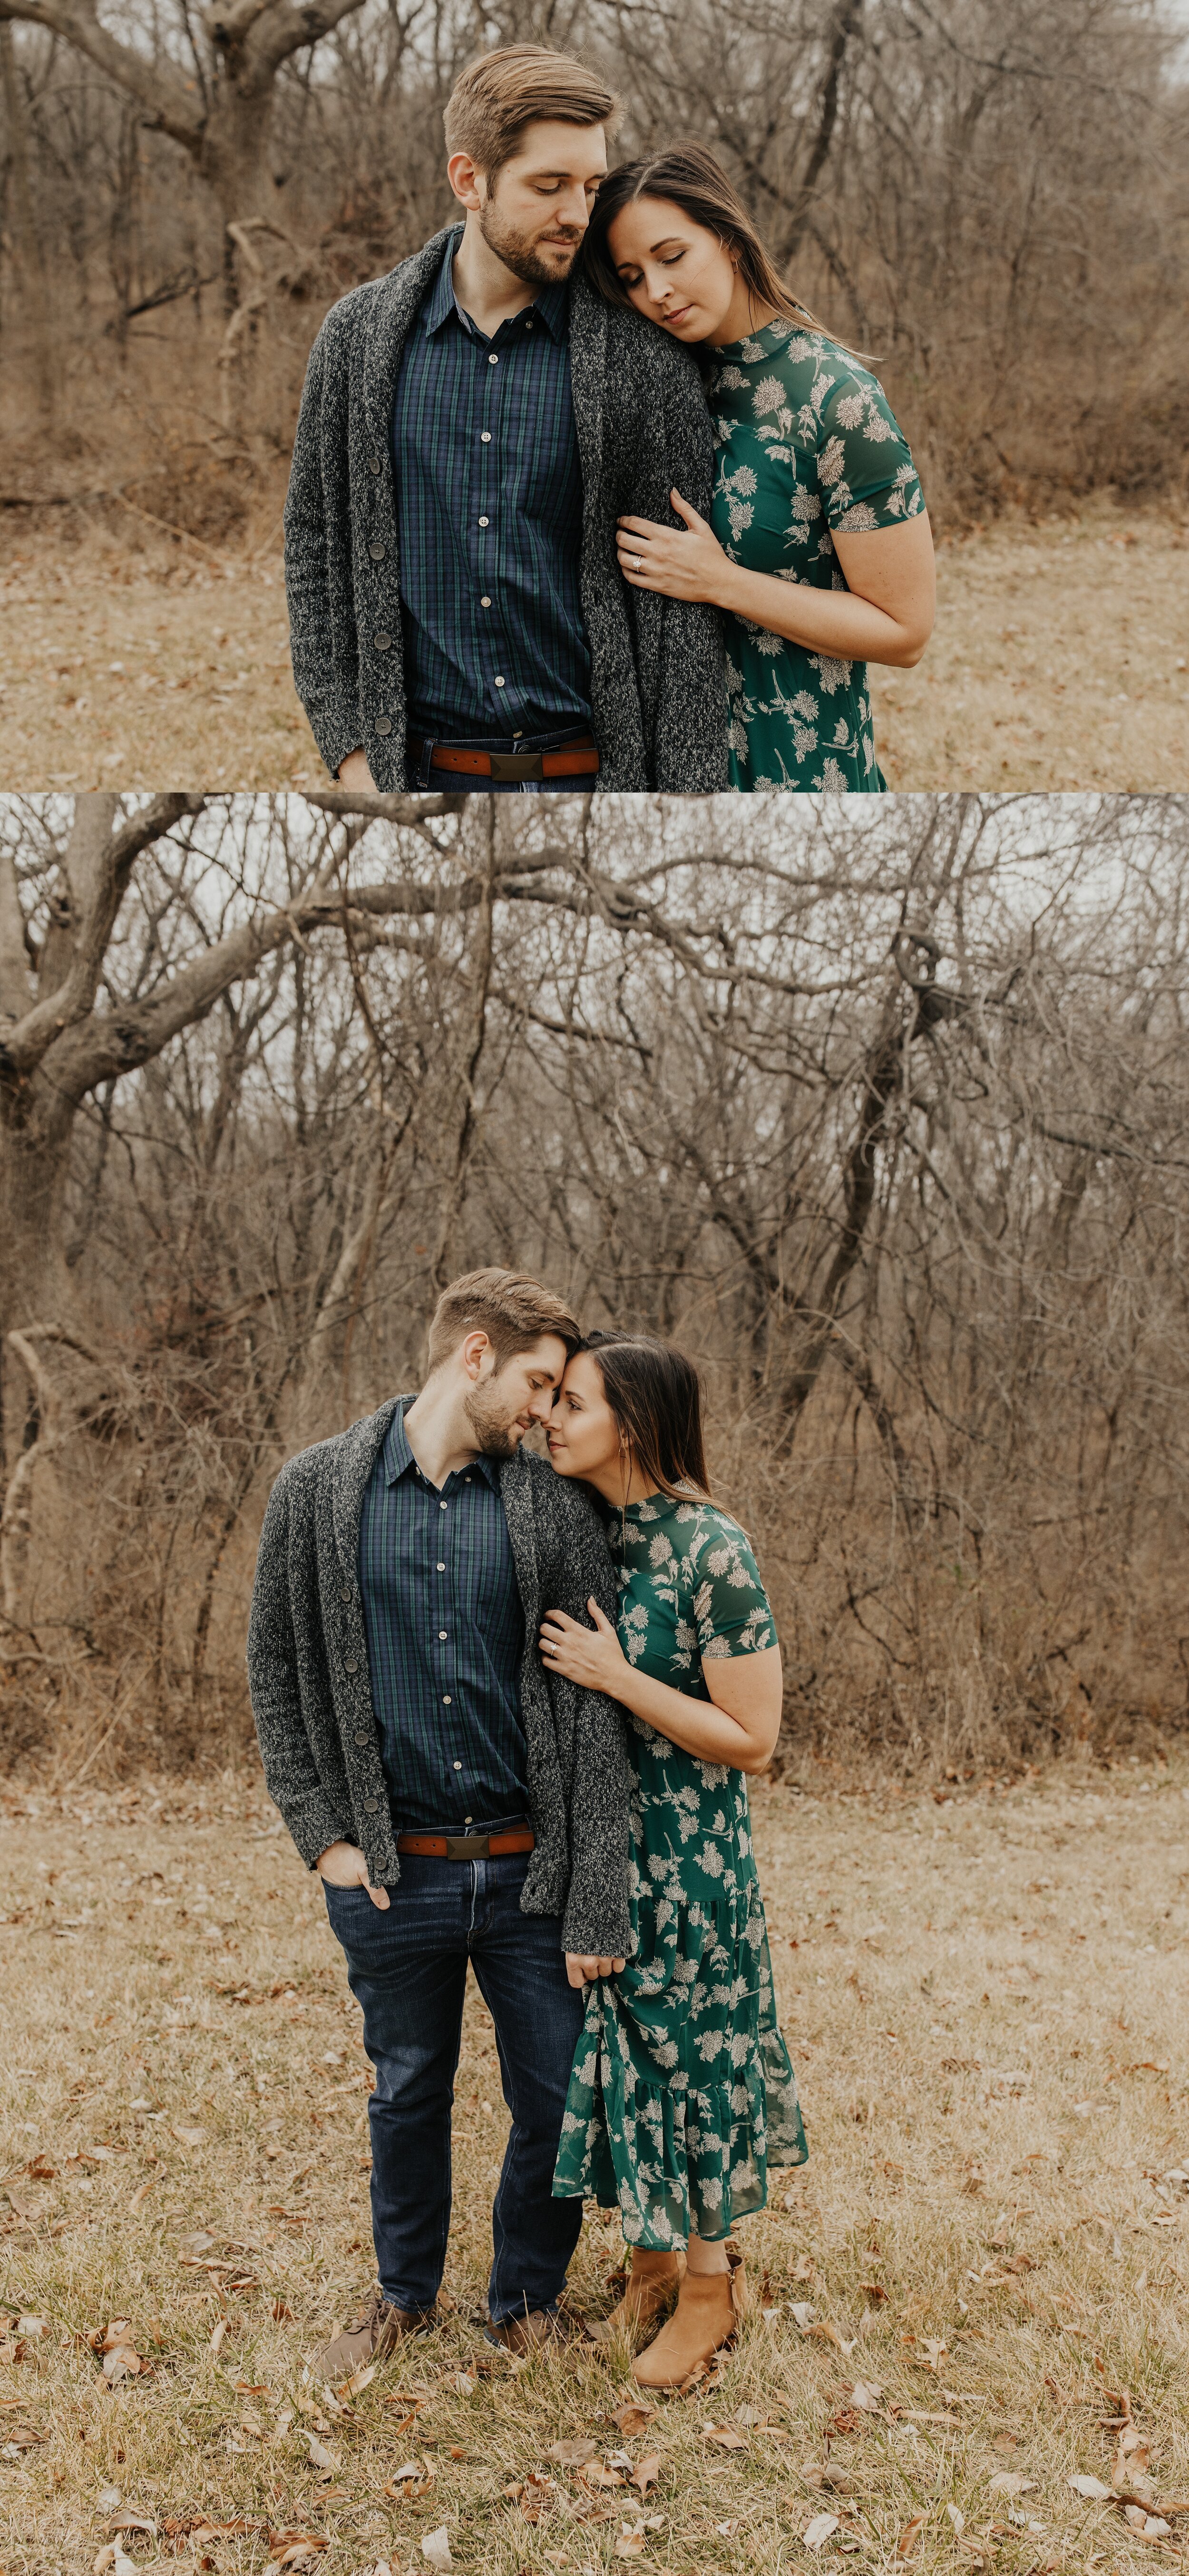 jessika-christine-photography-in+home-engagement-couples-cozy-adventurous-session (20).jpg